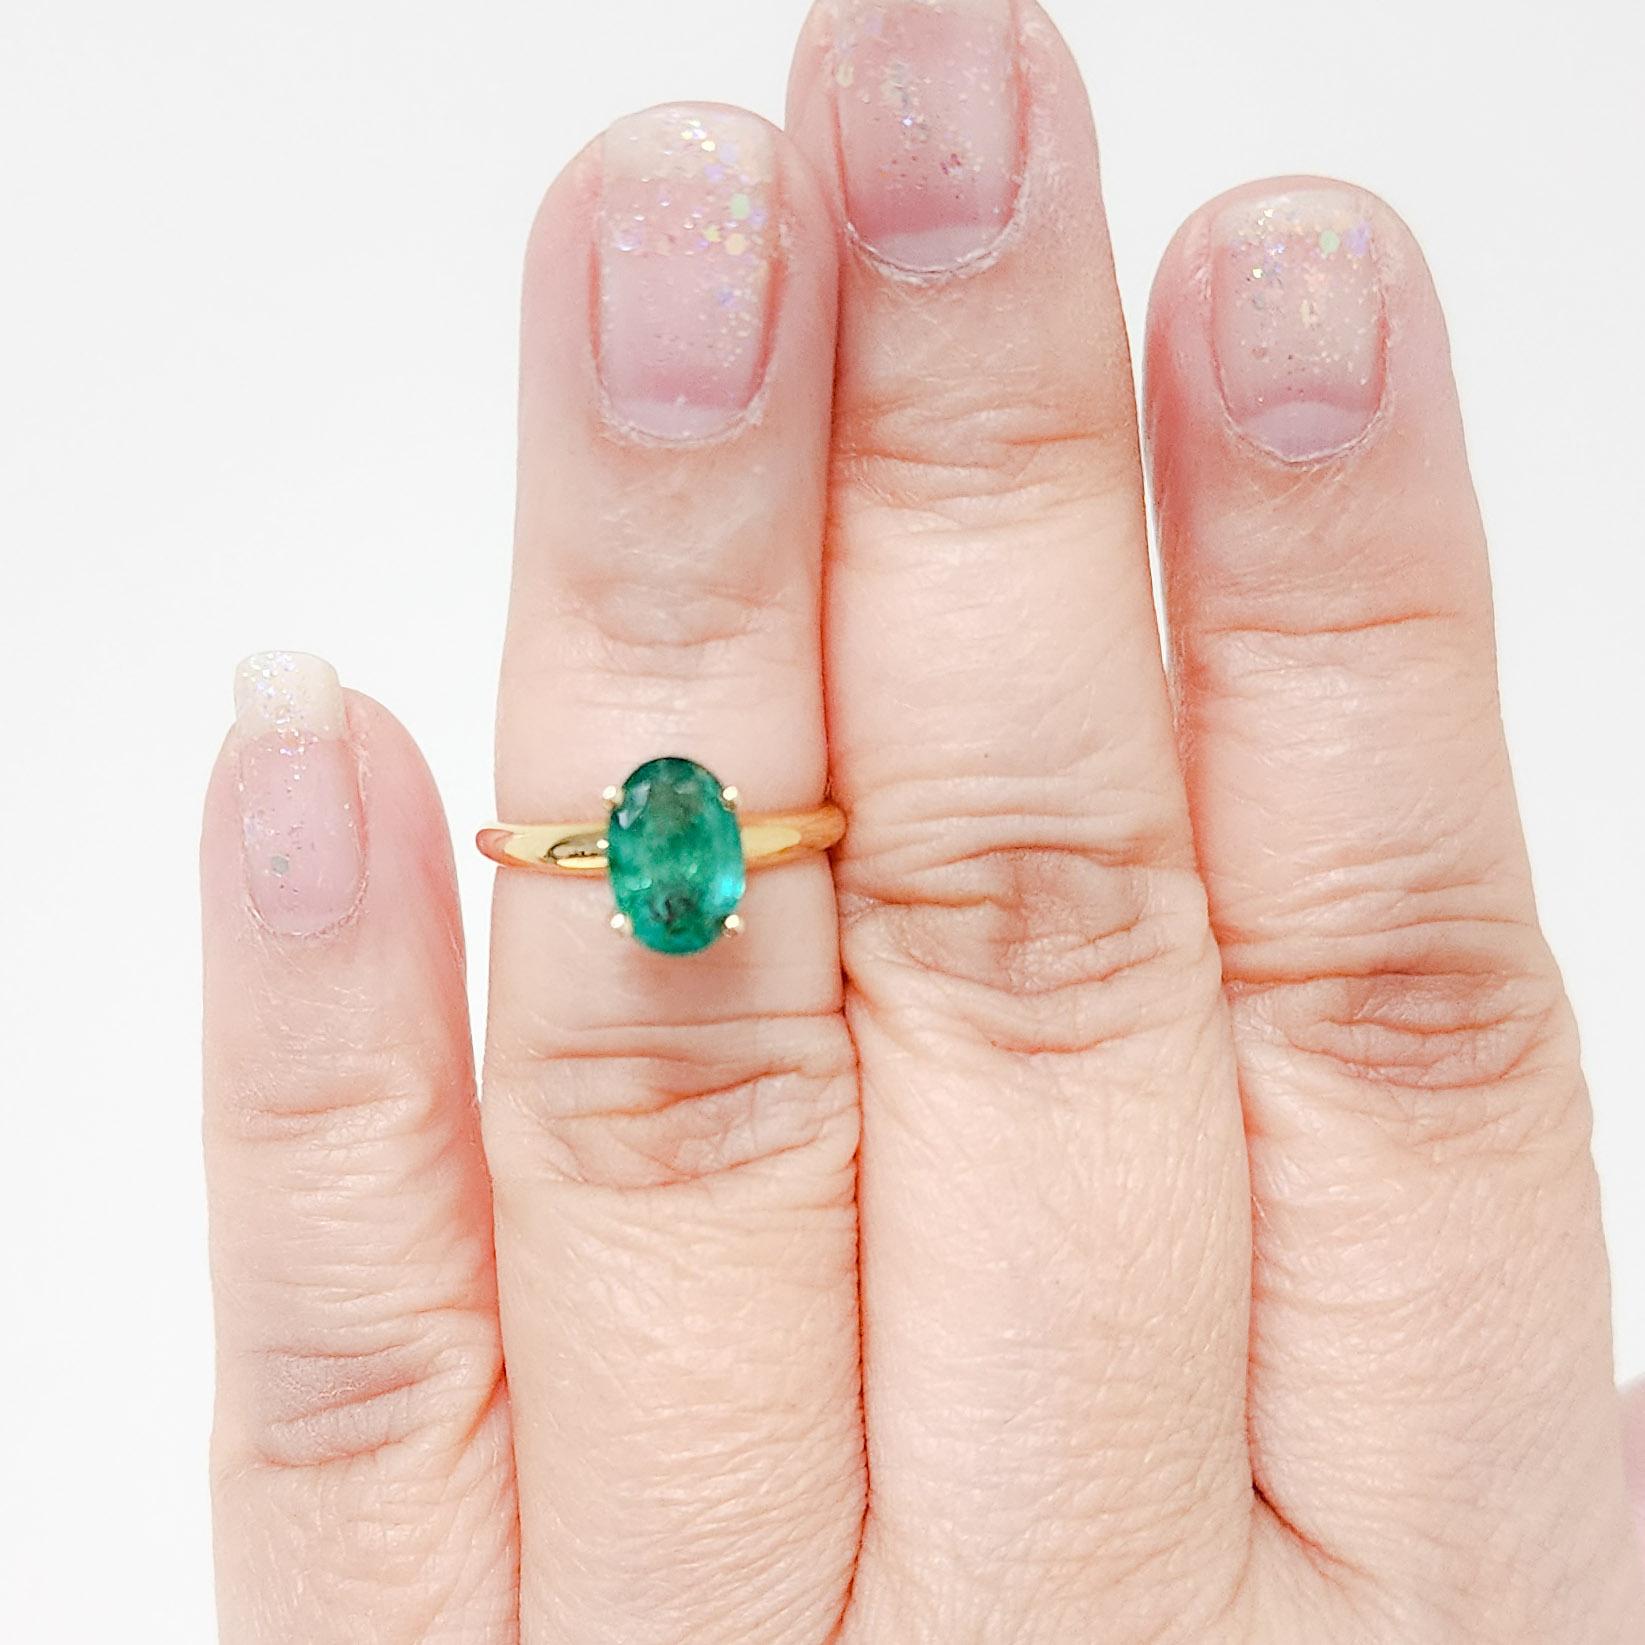 Beautiful 1.83 ct. emerald oval in a handmade 14k yellow gold ring.  Ring size 5.75.